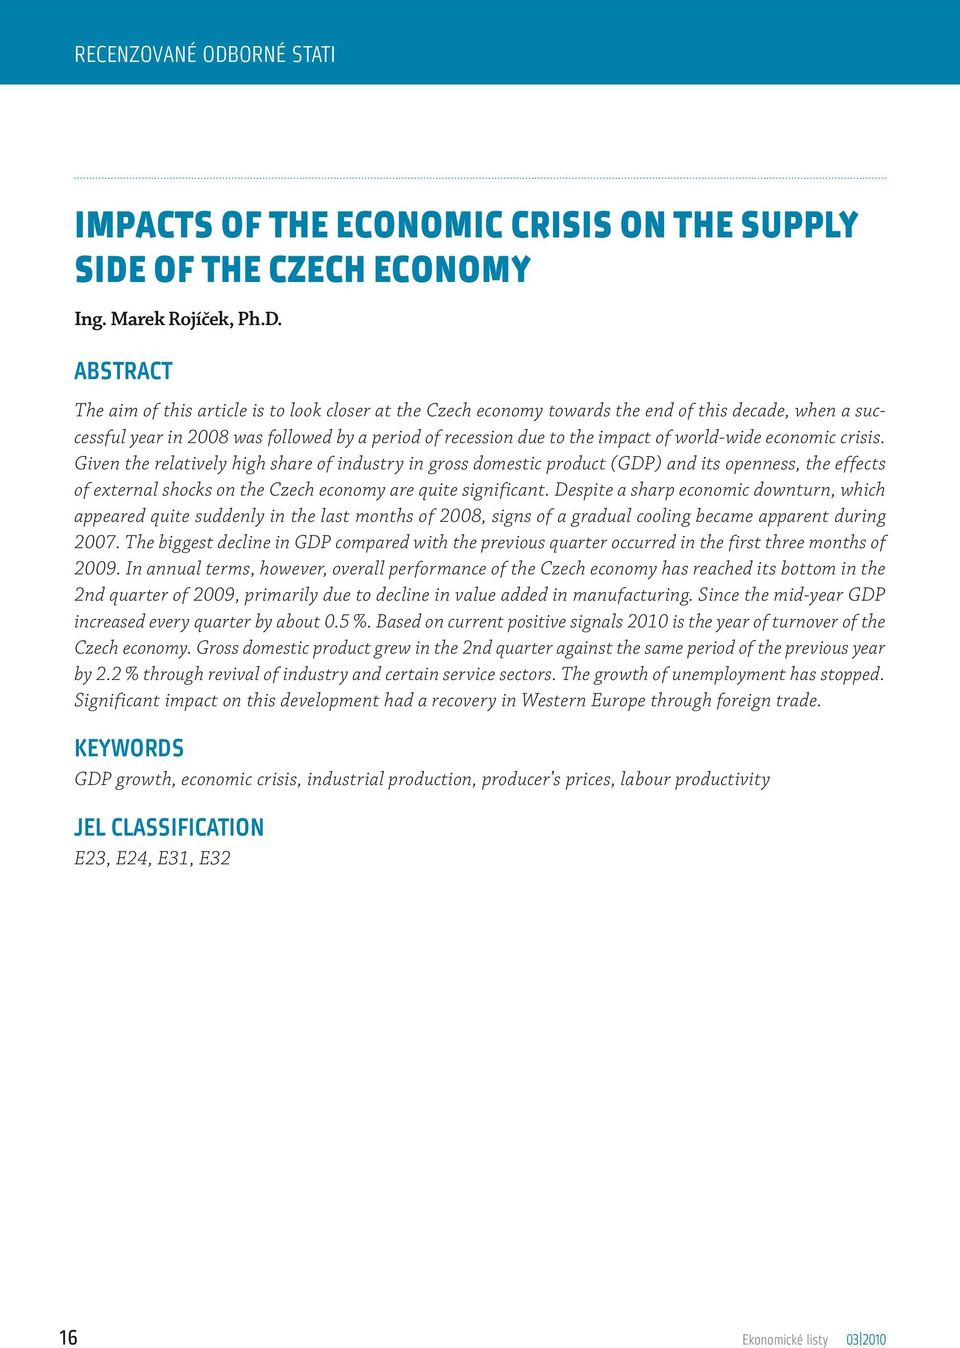 ABSTRACT The aim of this article is to look closer at the Czech economy towards the end of this decade, when a successful year in 2008 was followed by a period of recession due to the impact of